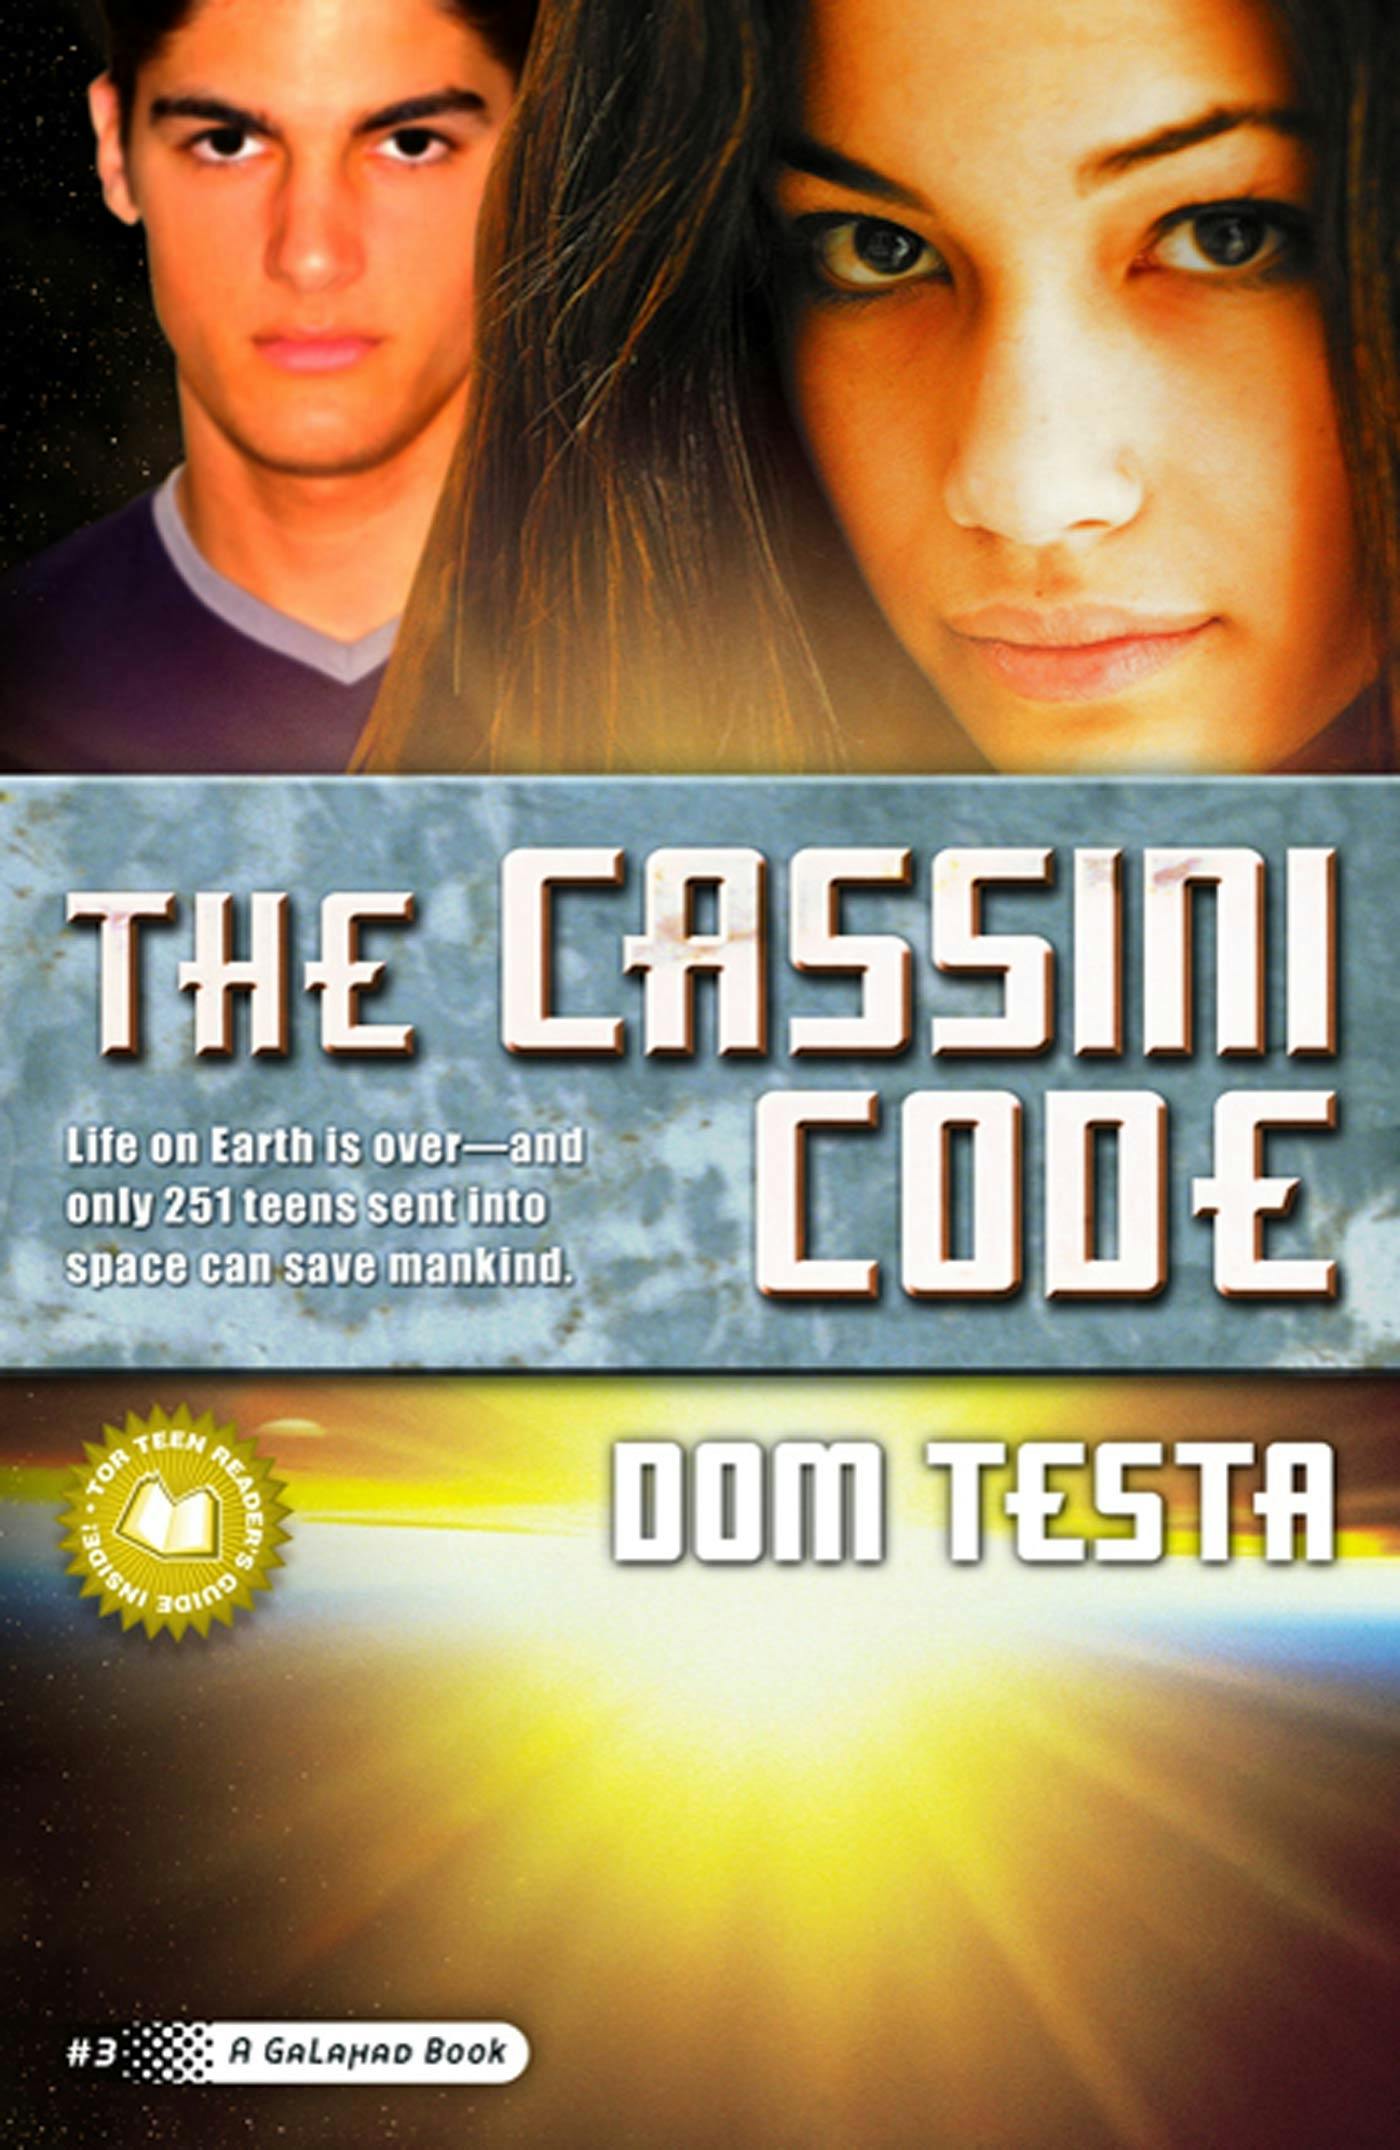 Cover for the book titled as: The Cassini Code